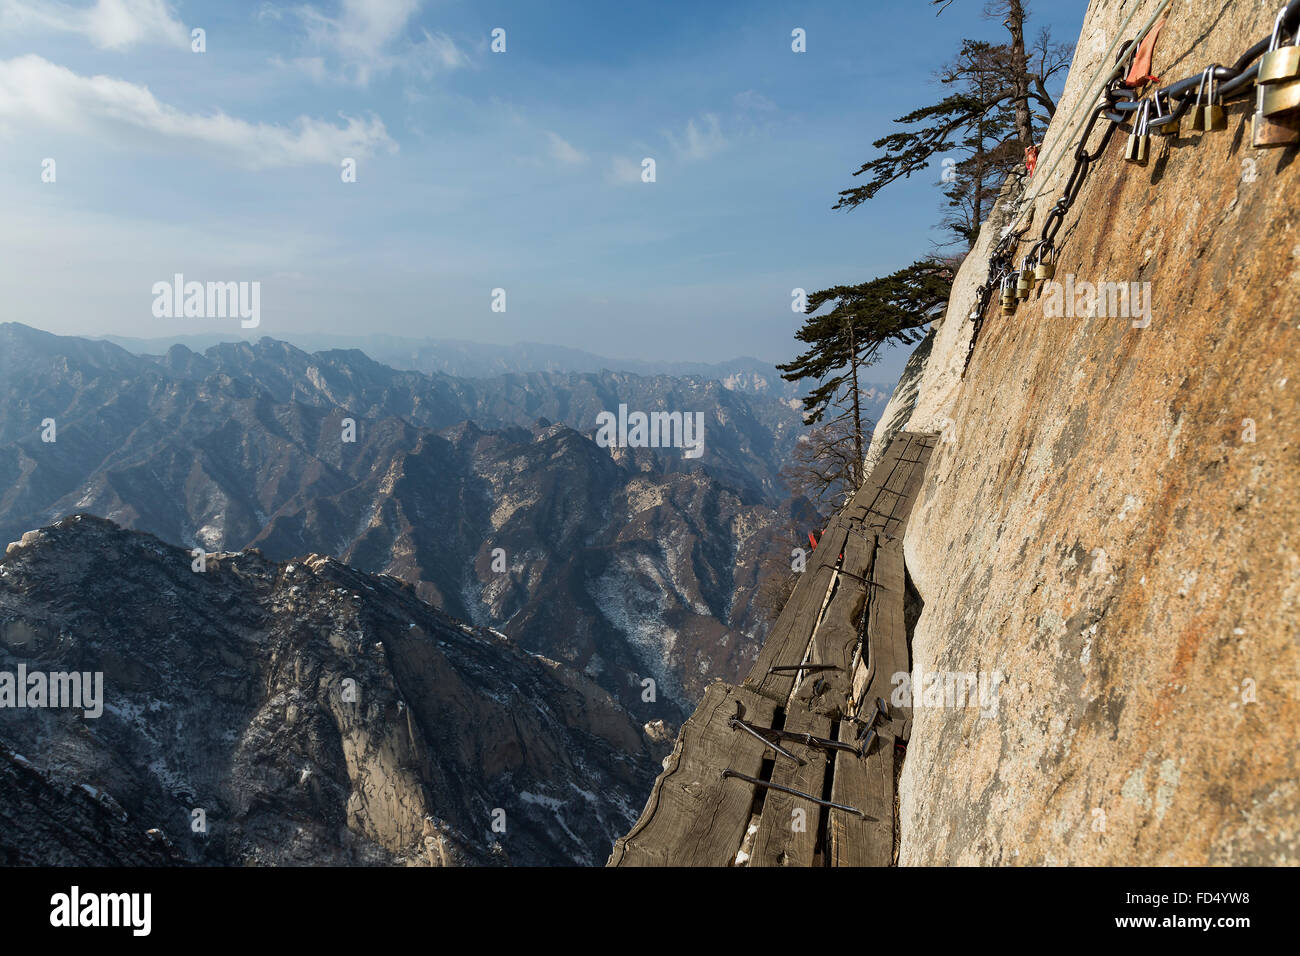 Wooden path of the Danger Trail of Mount Hua Shan Stock Photo